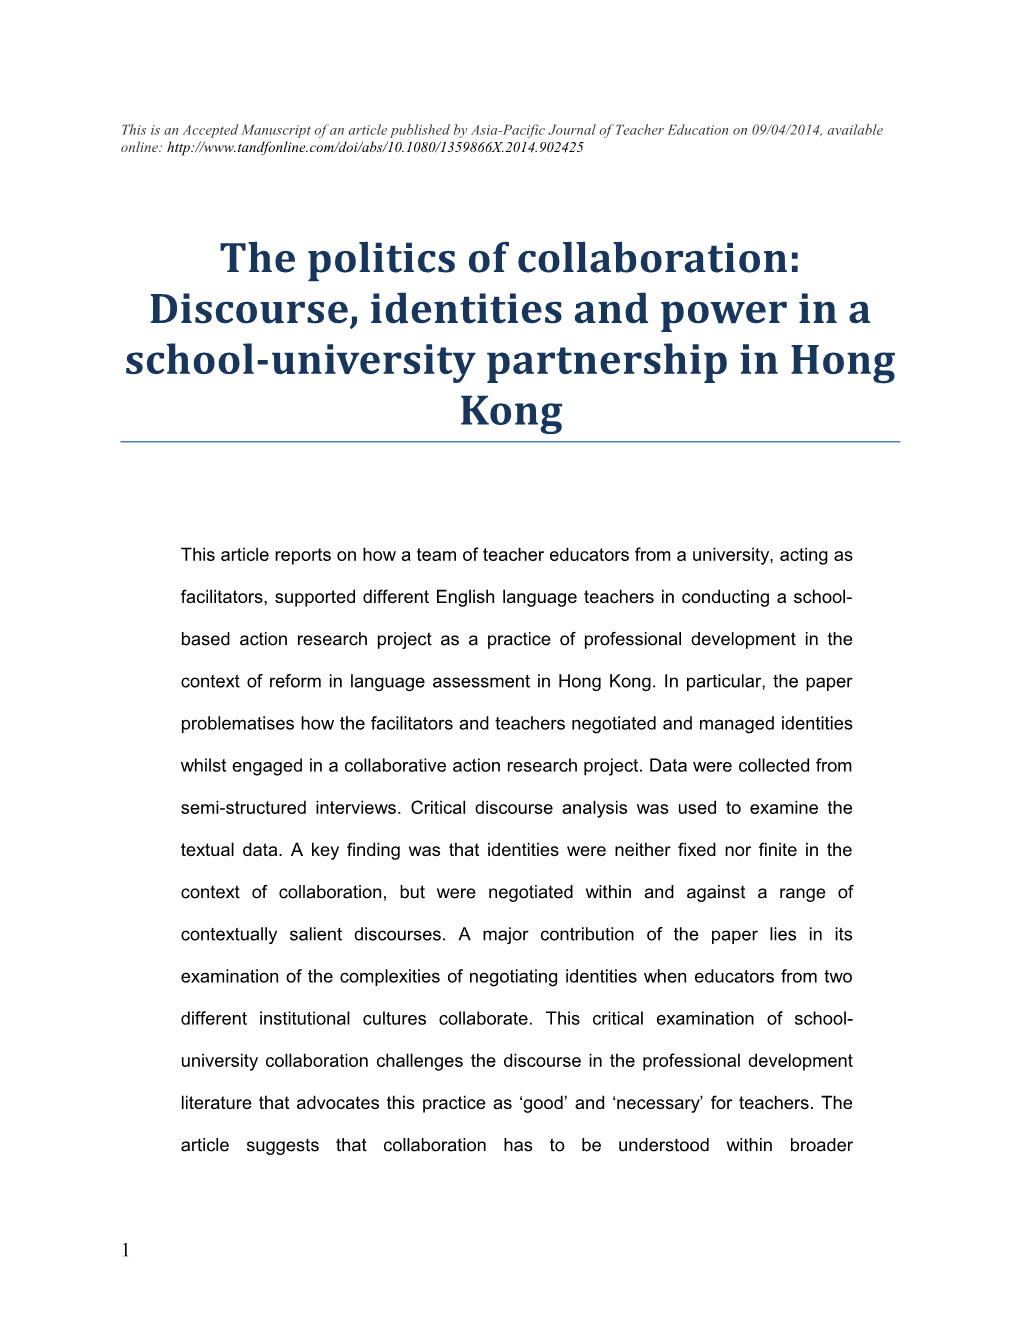 This Is an Accepted Manuscript of an Article Published by Asia-Pacific Journal of Teacher